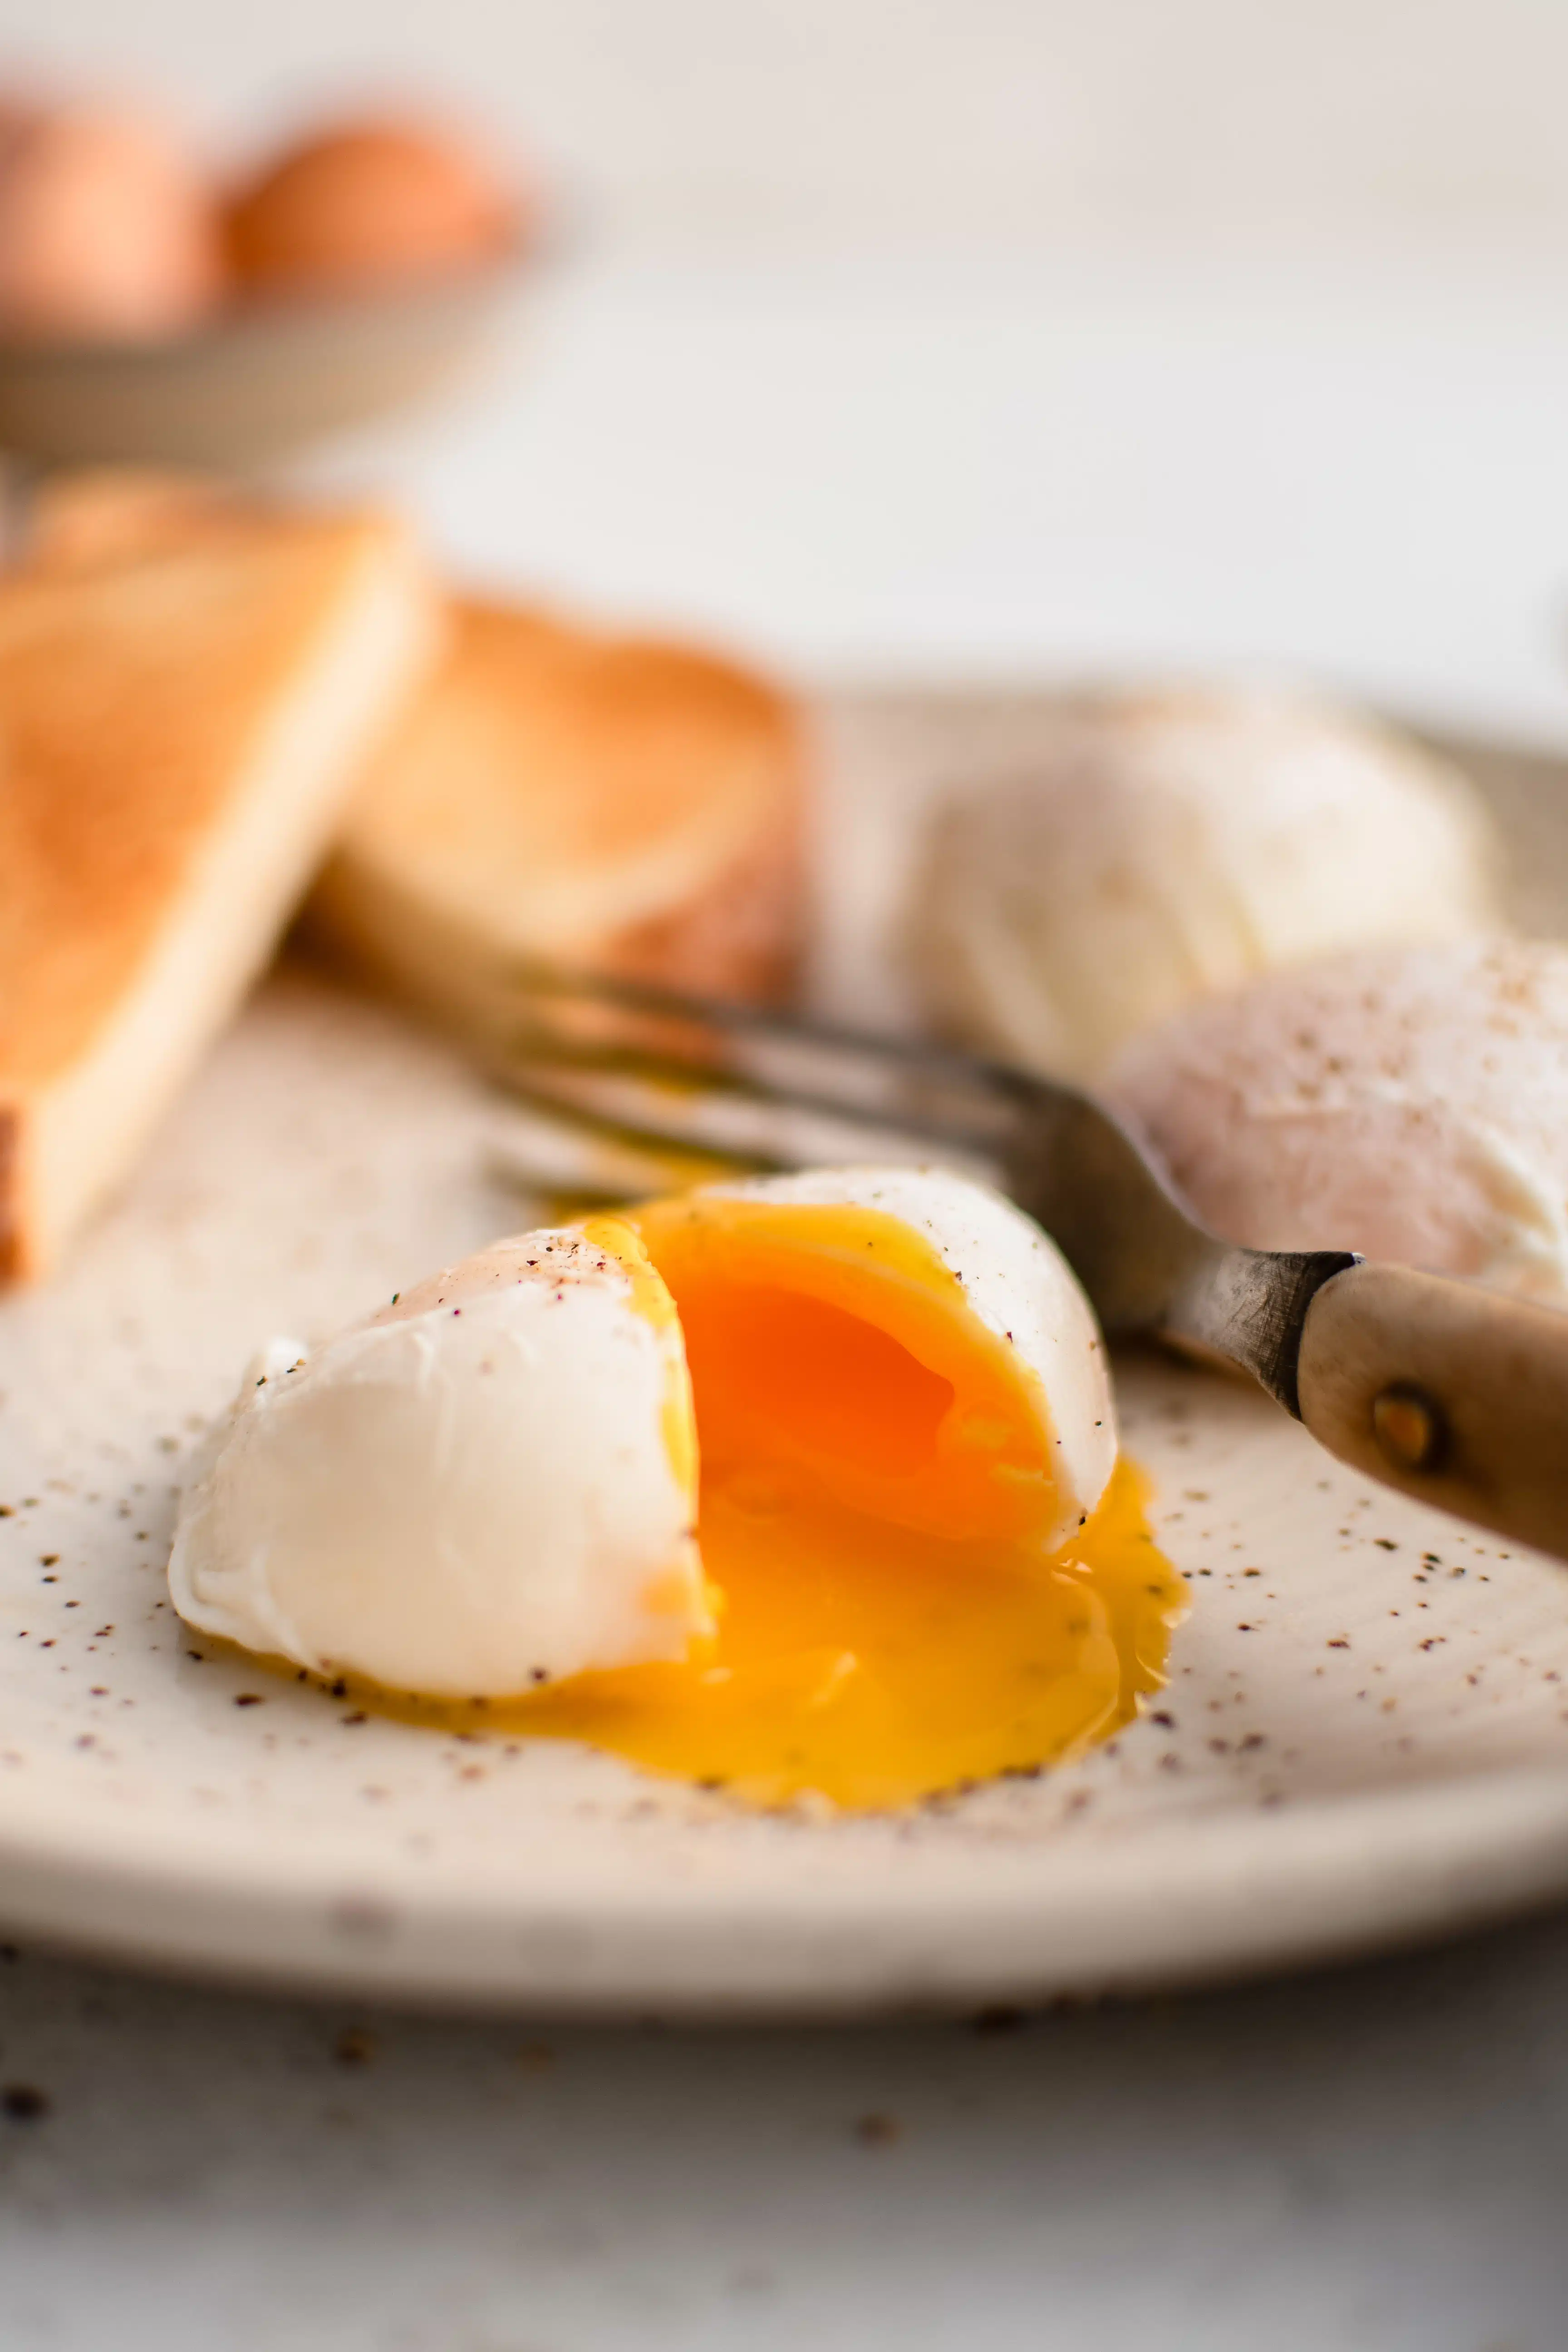 Poached egg sliced open with a runny yellow yolk on a white plate with sliced toast and two more poached eggs in the background.